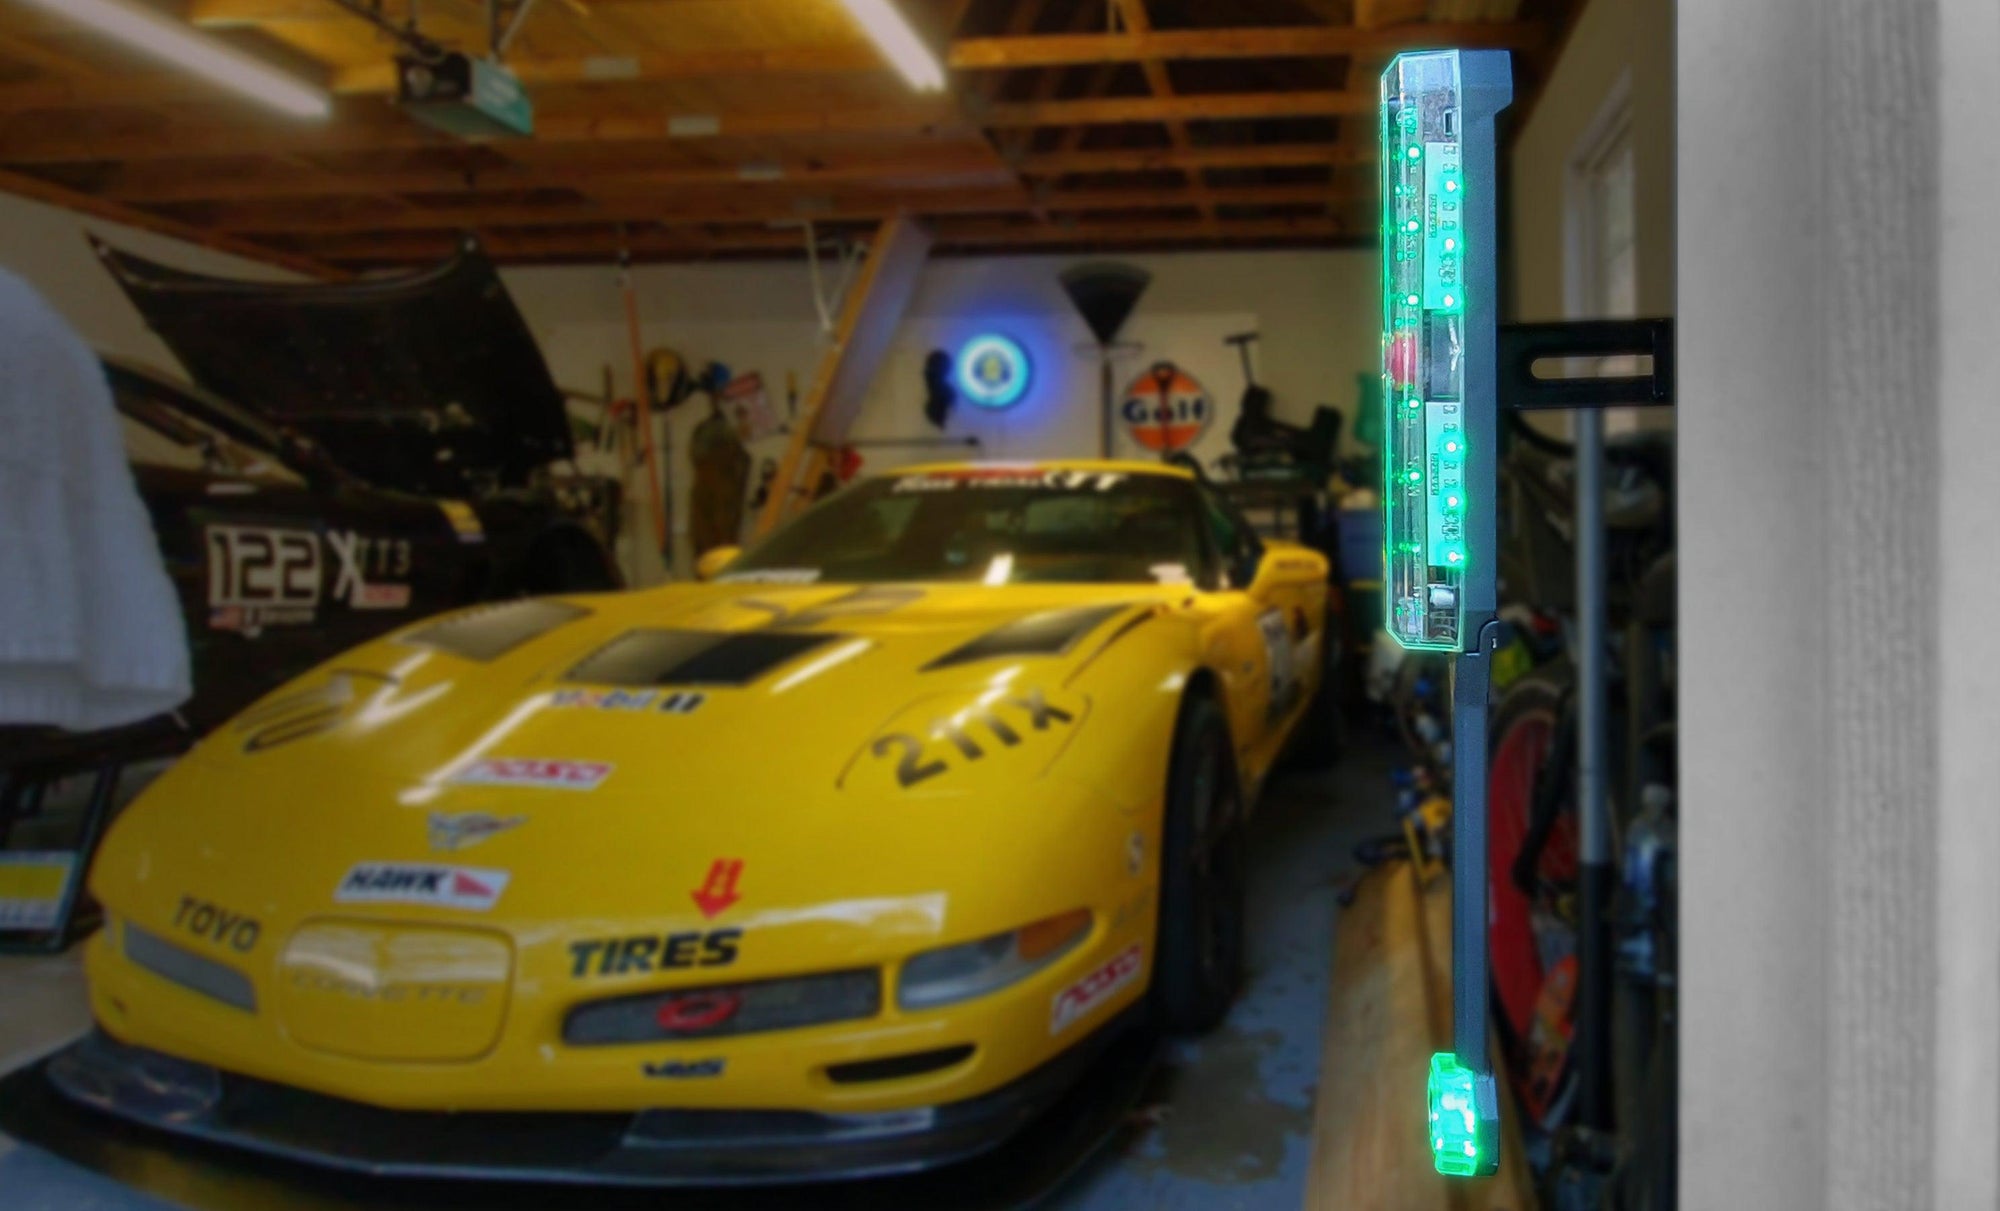 STKR Side Parking Sensor in the Foreground. Corvette in a garage setting in the background.